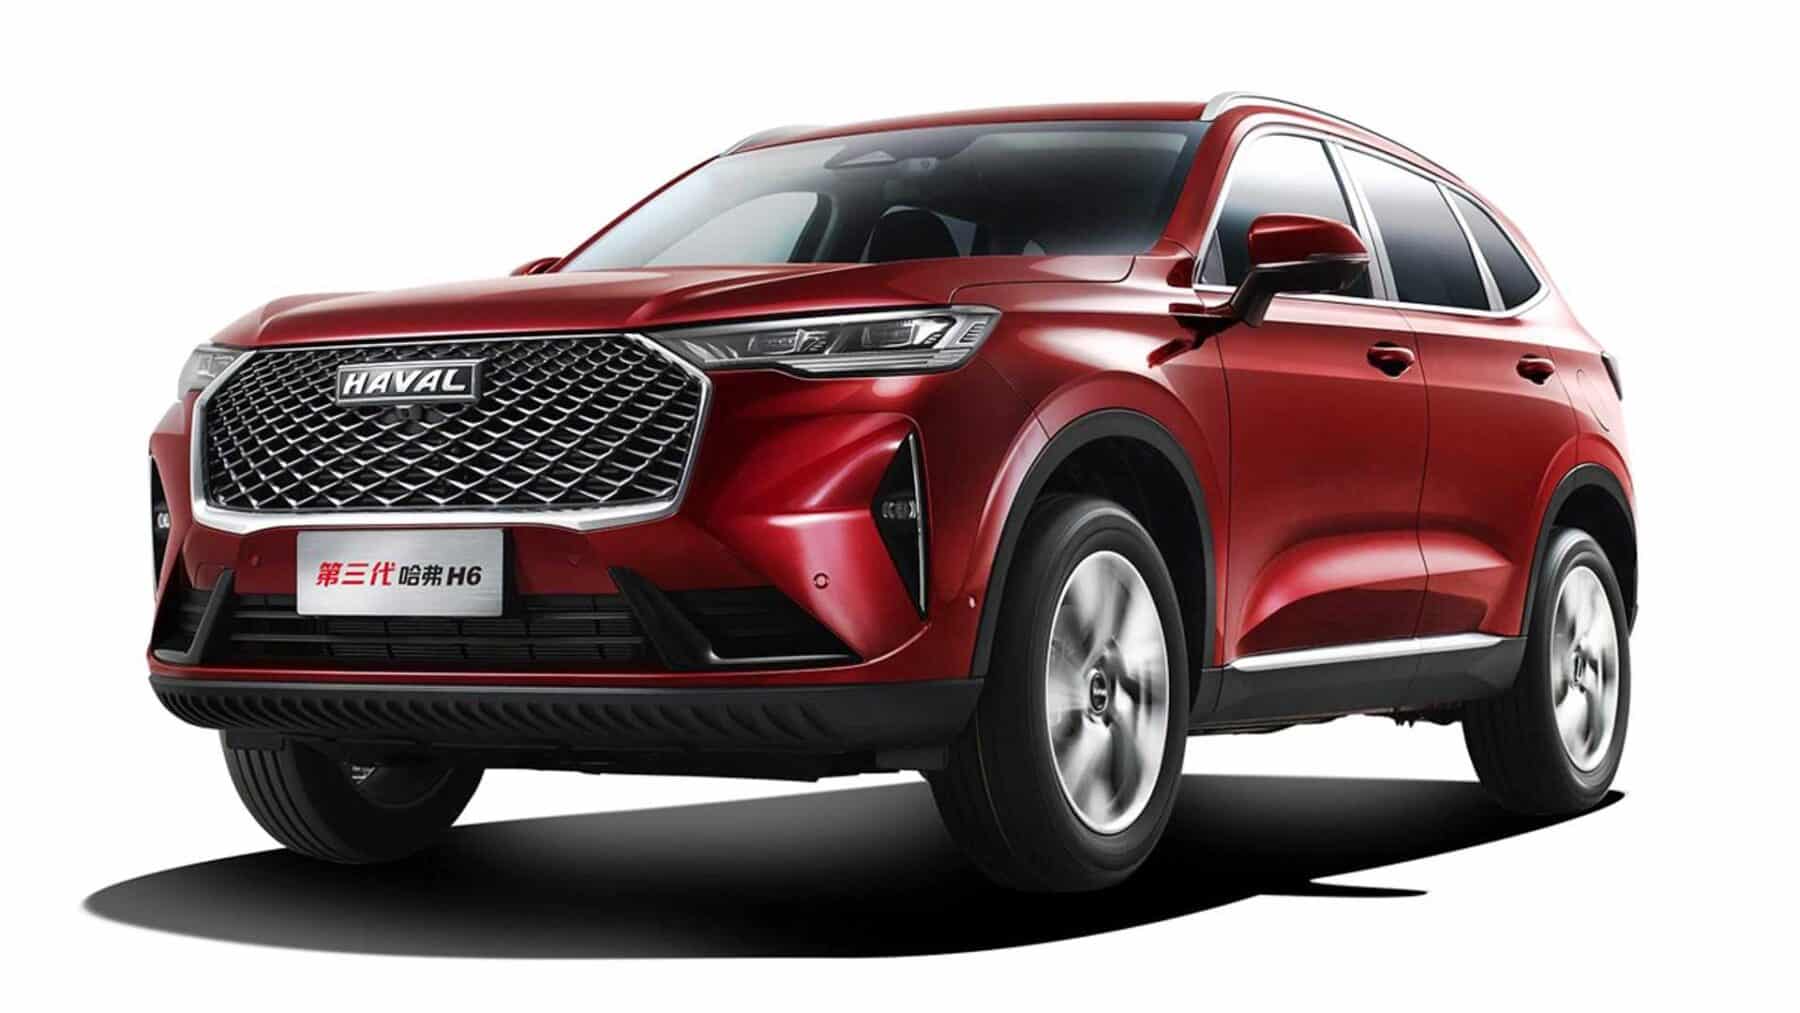 First images of the new Haval H6